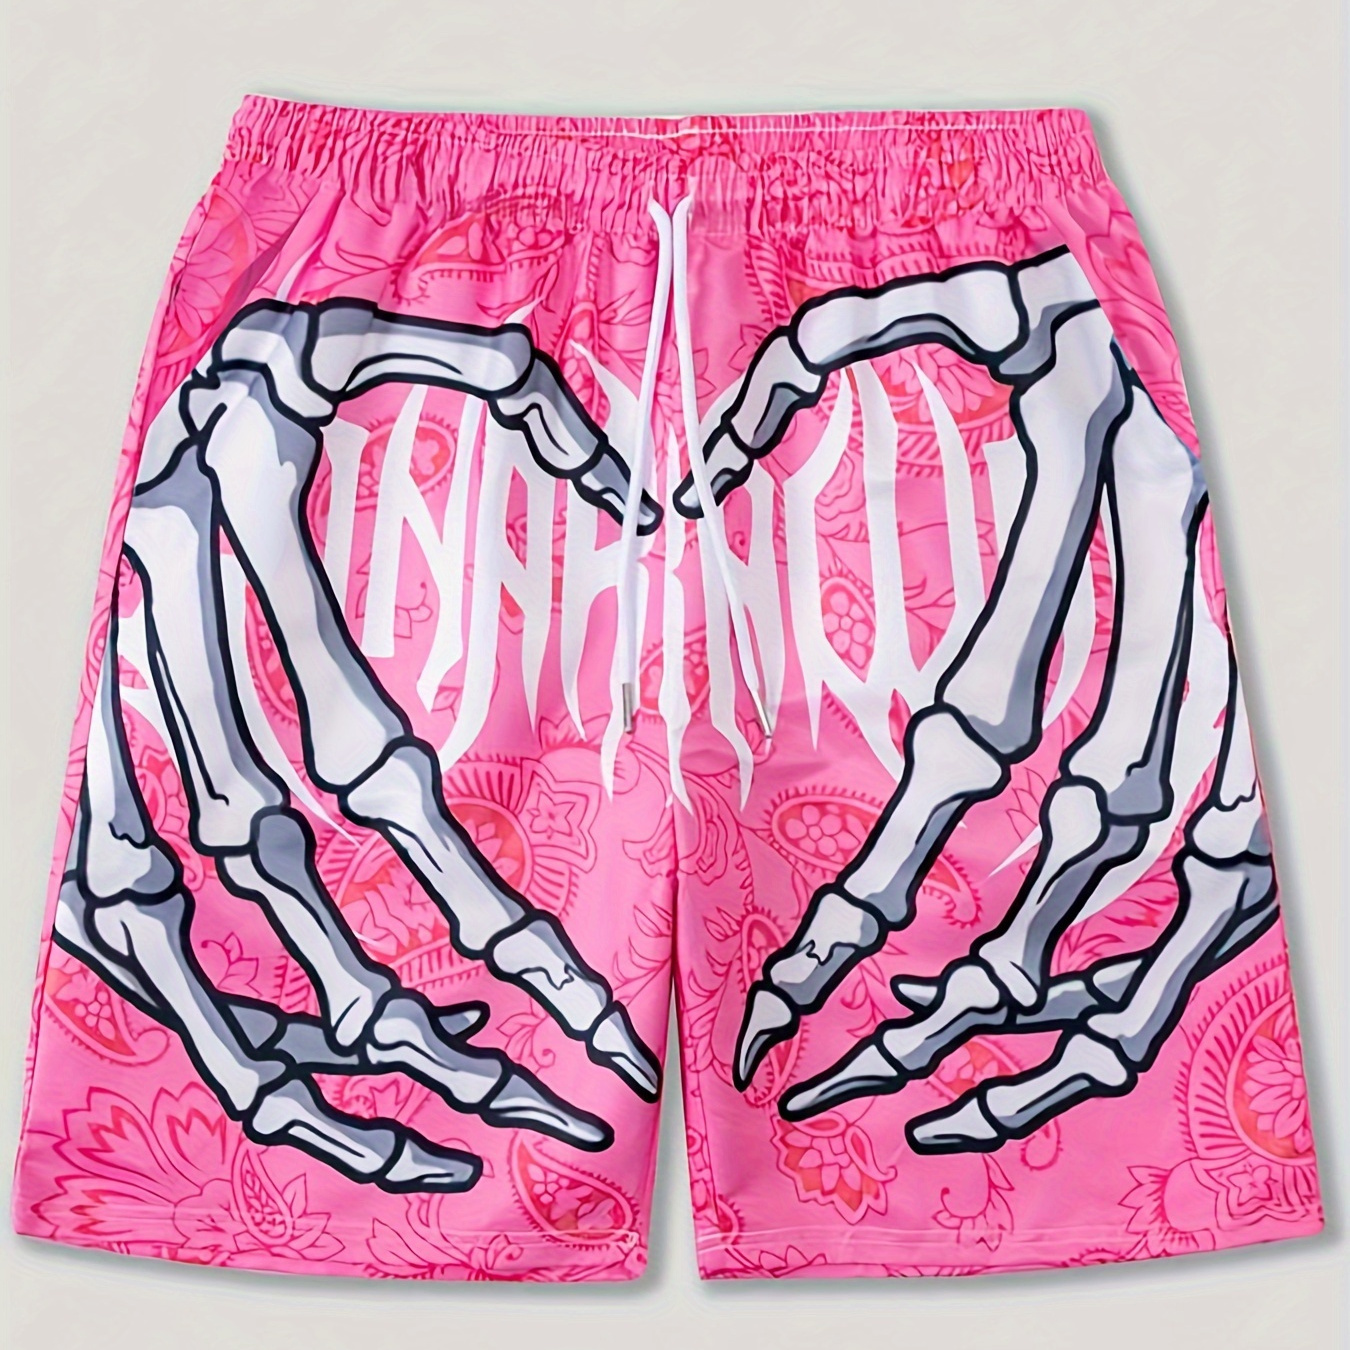 

Men's Trendy Hawaiian Graphic Shorts With Drawstring And Fancy Skeleton Print For Summer Beach, Pool And Resort